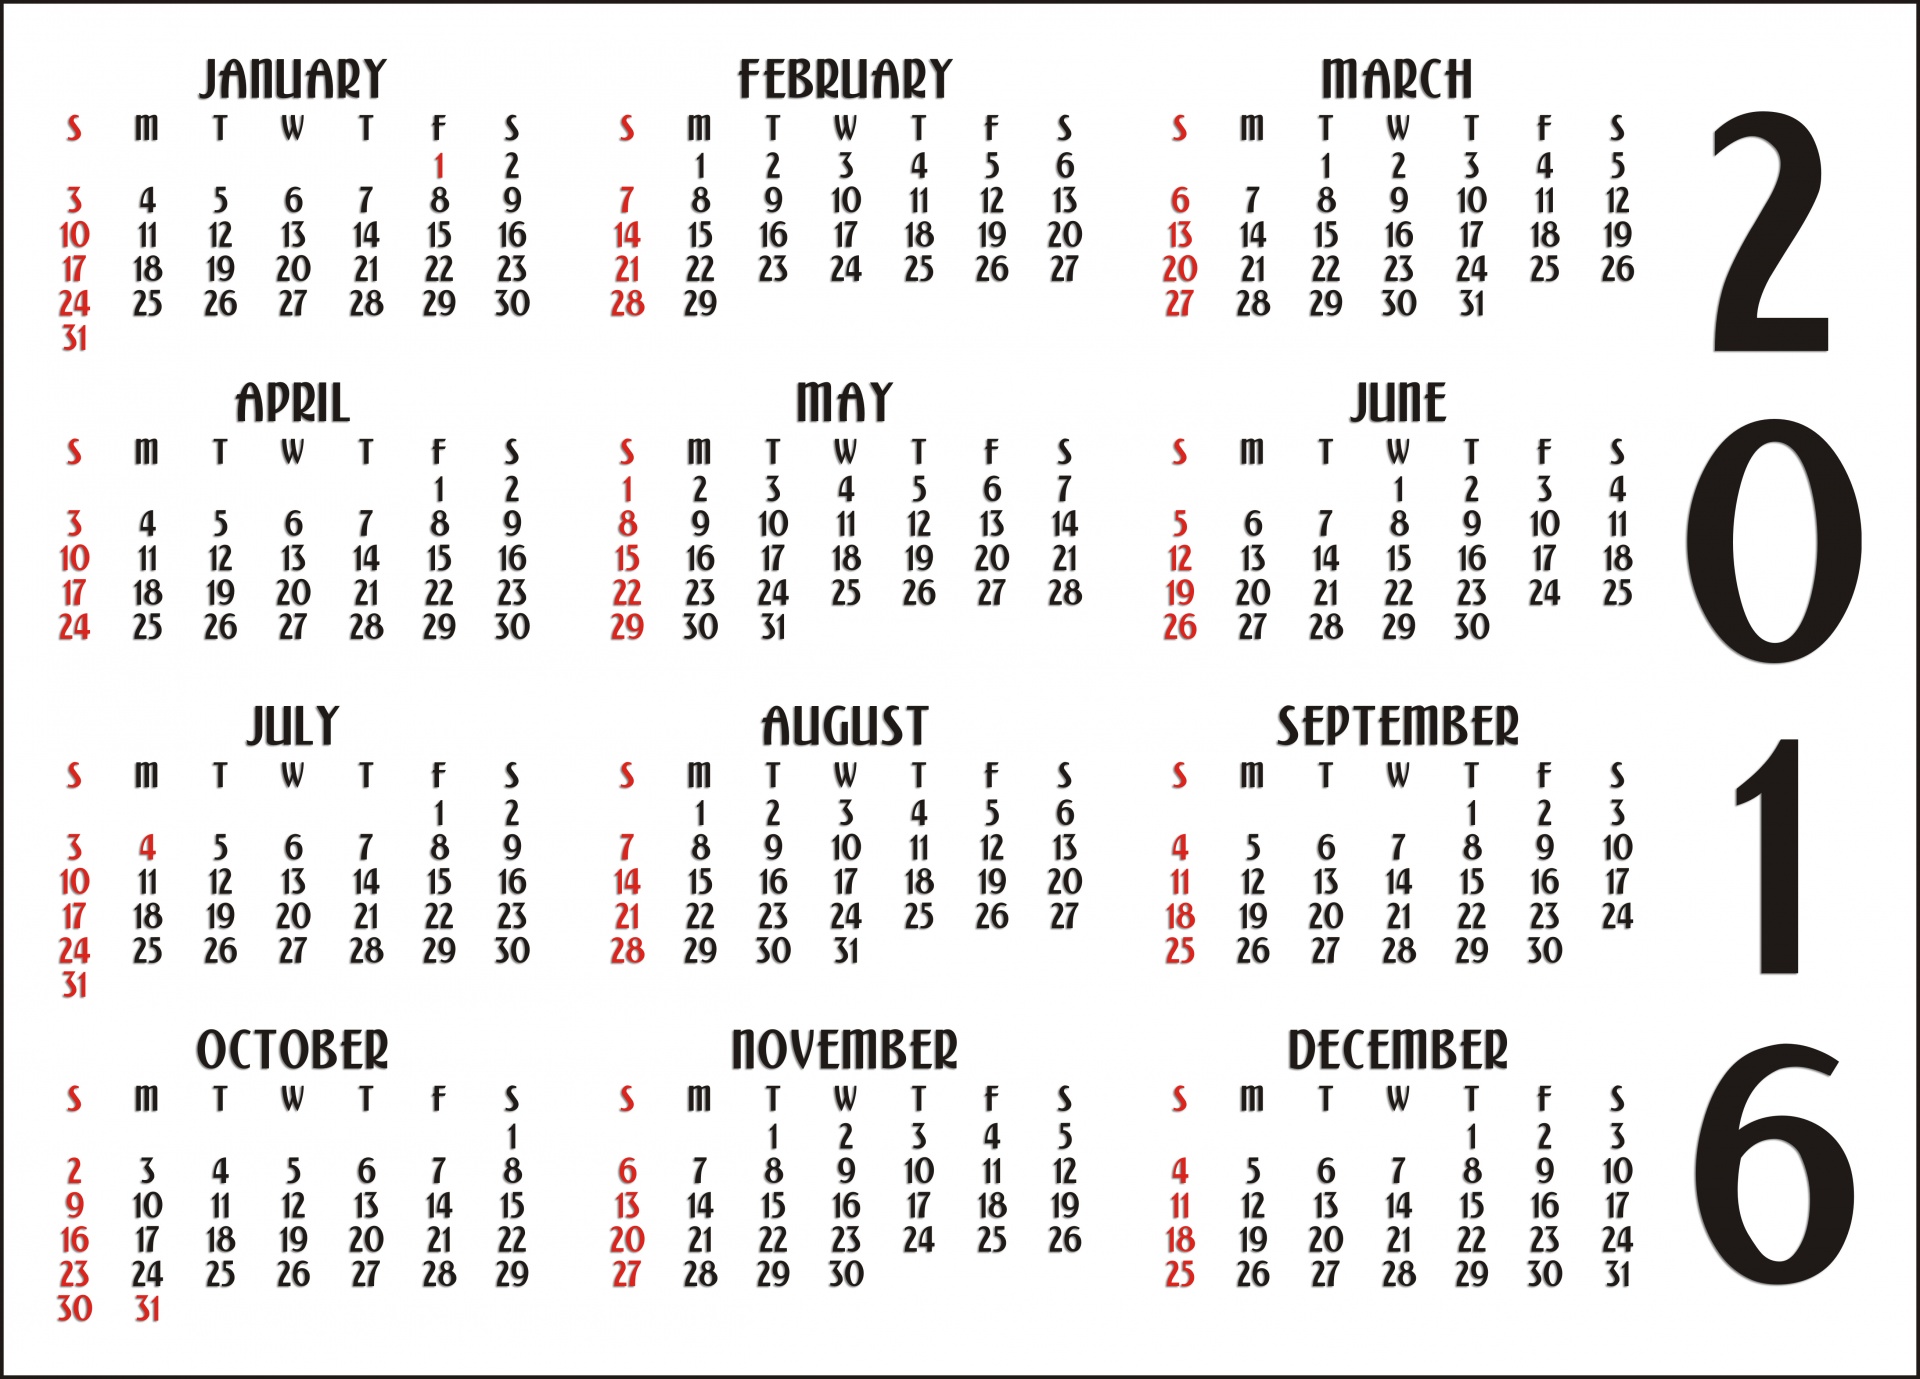 Download free photo of Calendar,2016 calendar,months,days,years from